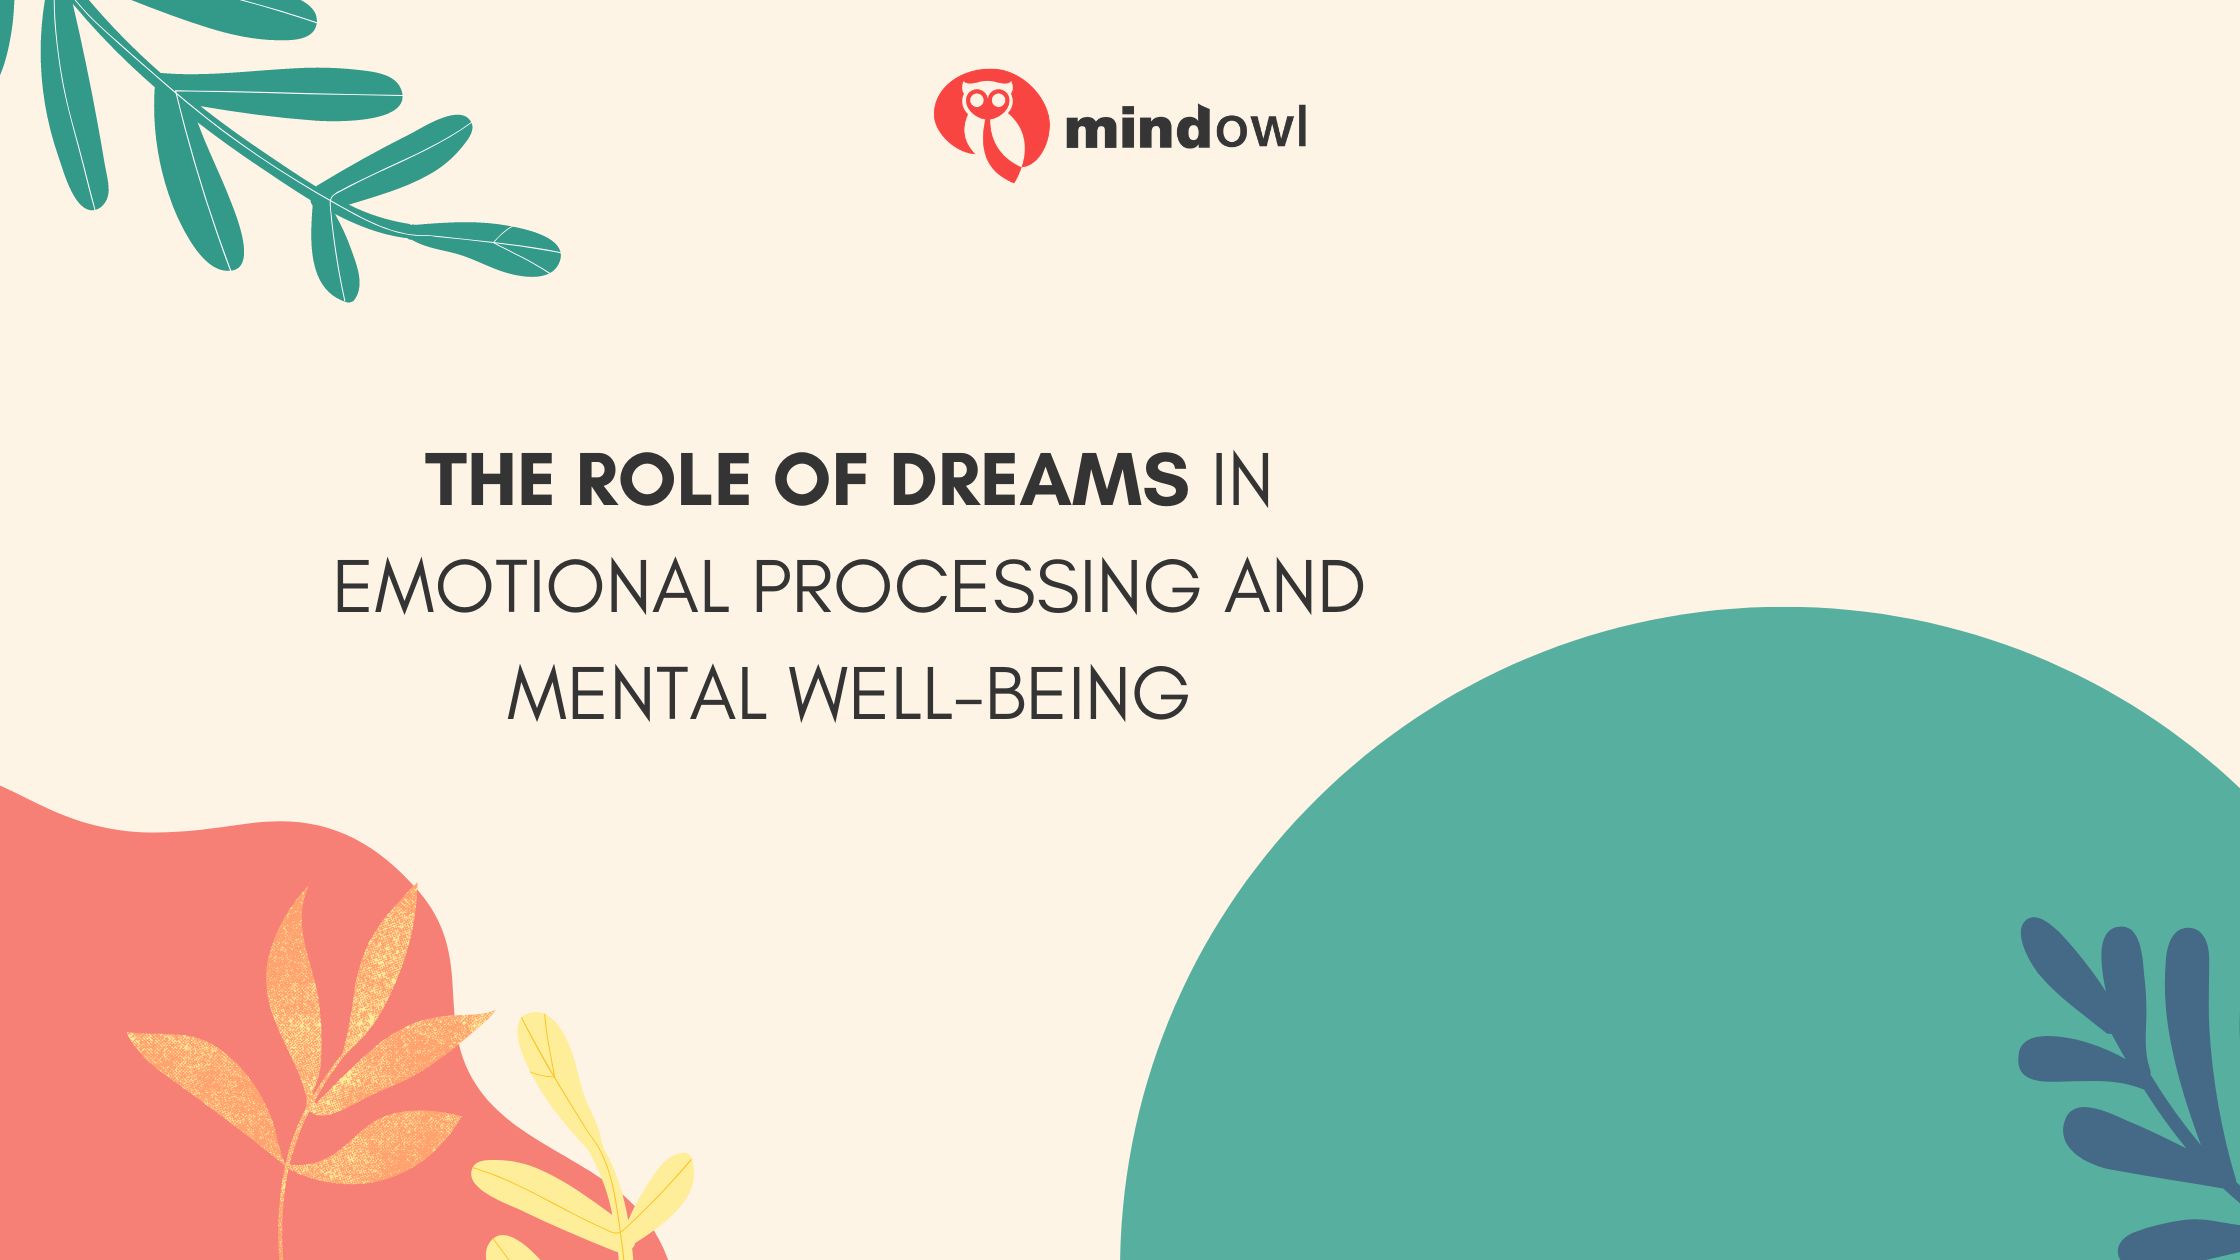 The Role Of Dreams In Emotional Processing And Mental Well-Being